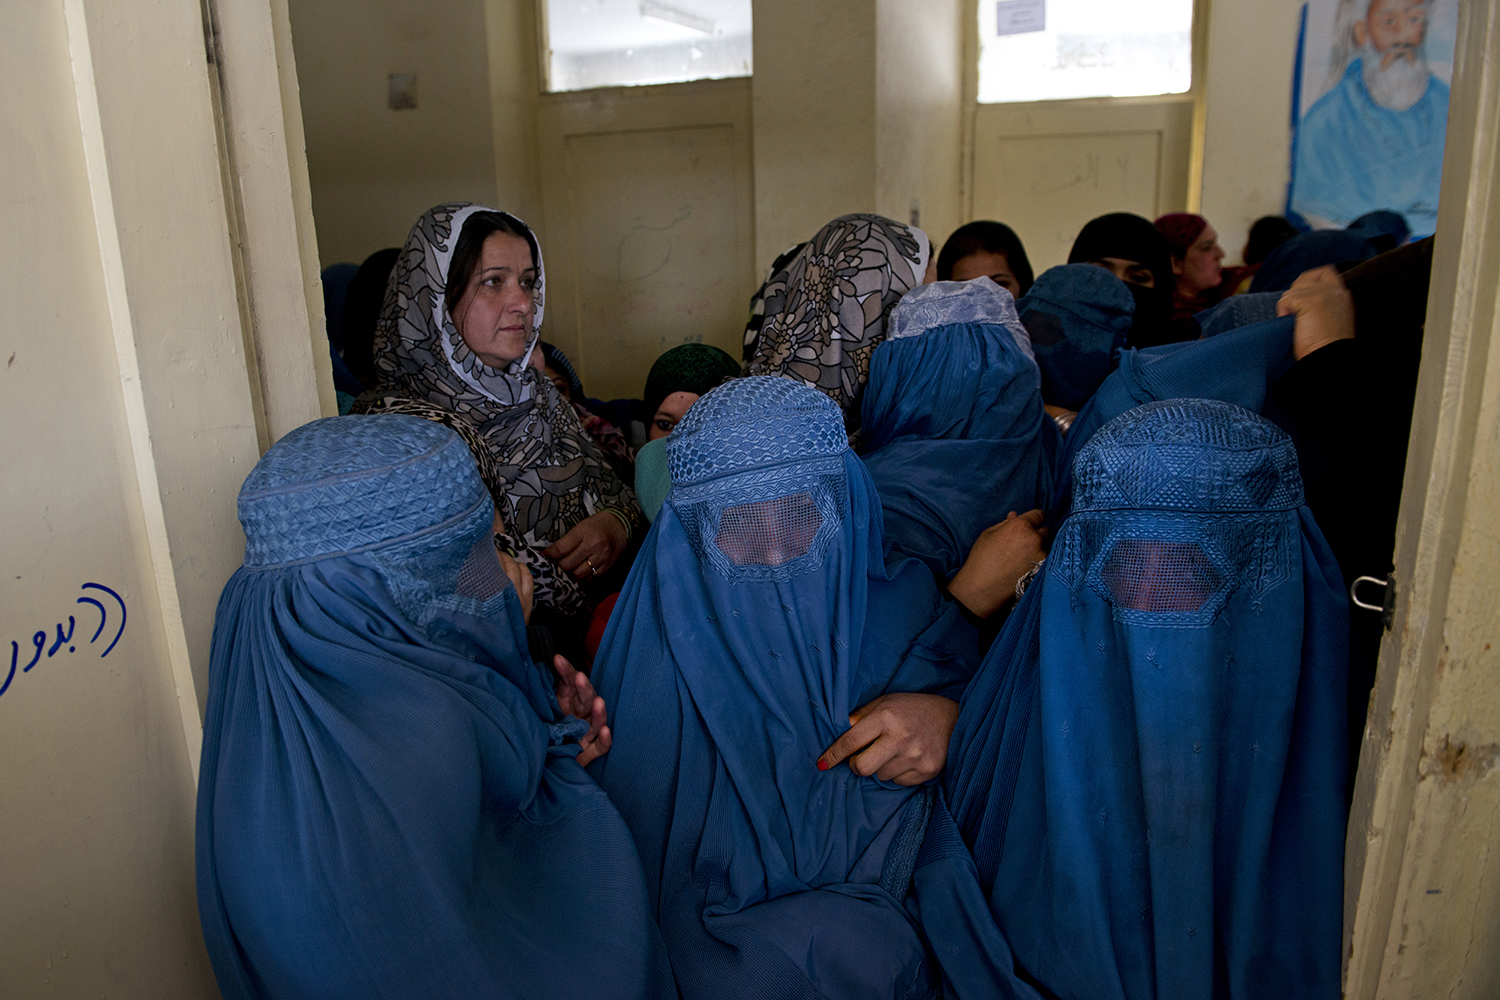 Afghan women line up to register to vote for Presidential elections at a center run by the Afghan Independent Electoral Commission in Shah Shaheed, Kabul, Afghanistan, March 25, 2014.